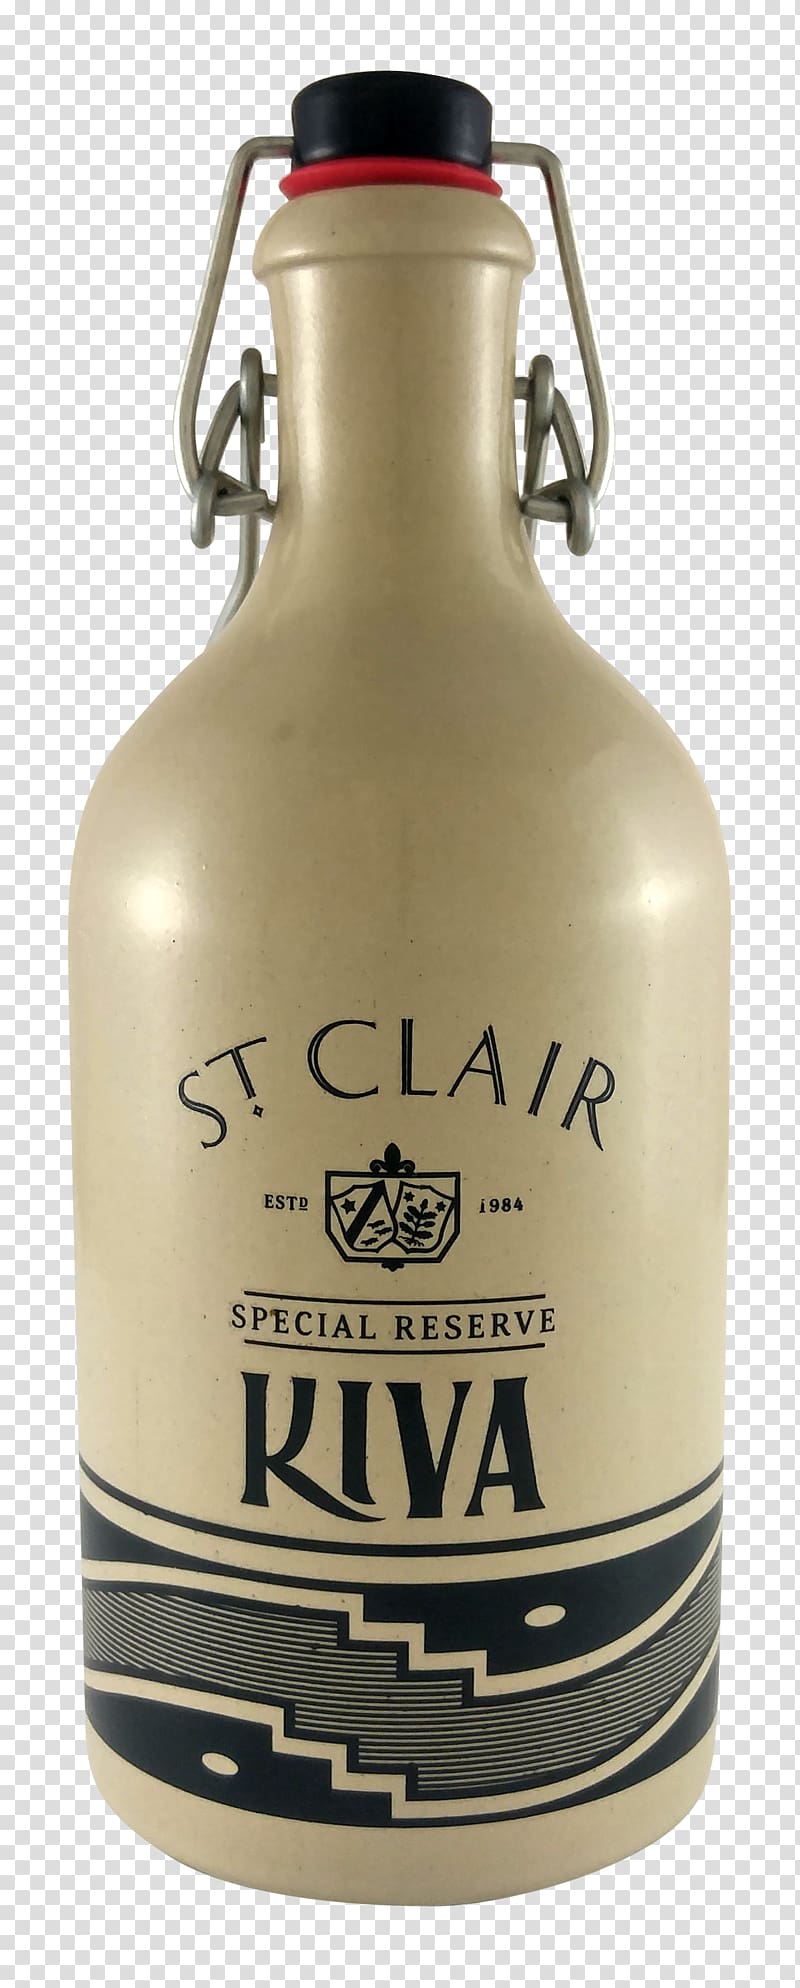 St. Clair Winery & Tasting Room Beer bottle, wine transparent background PNG clipart